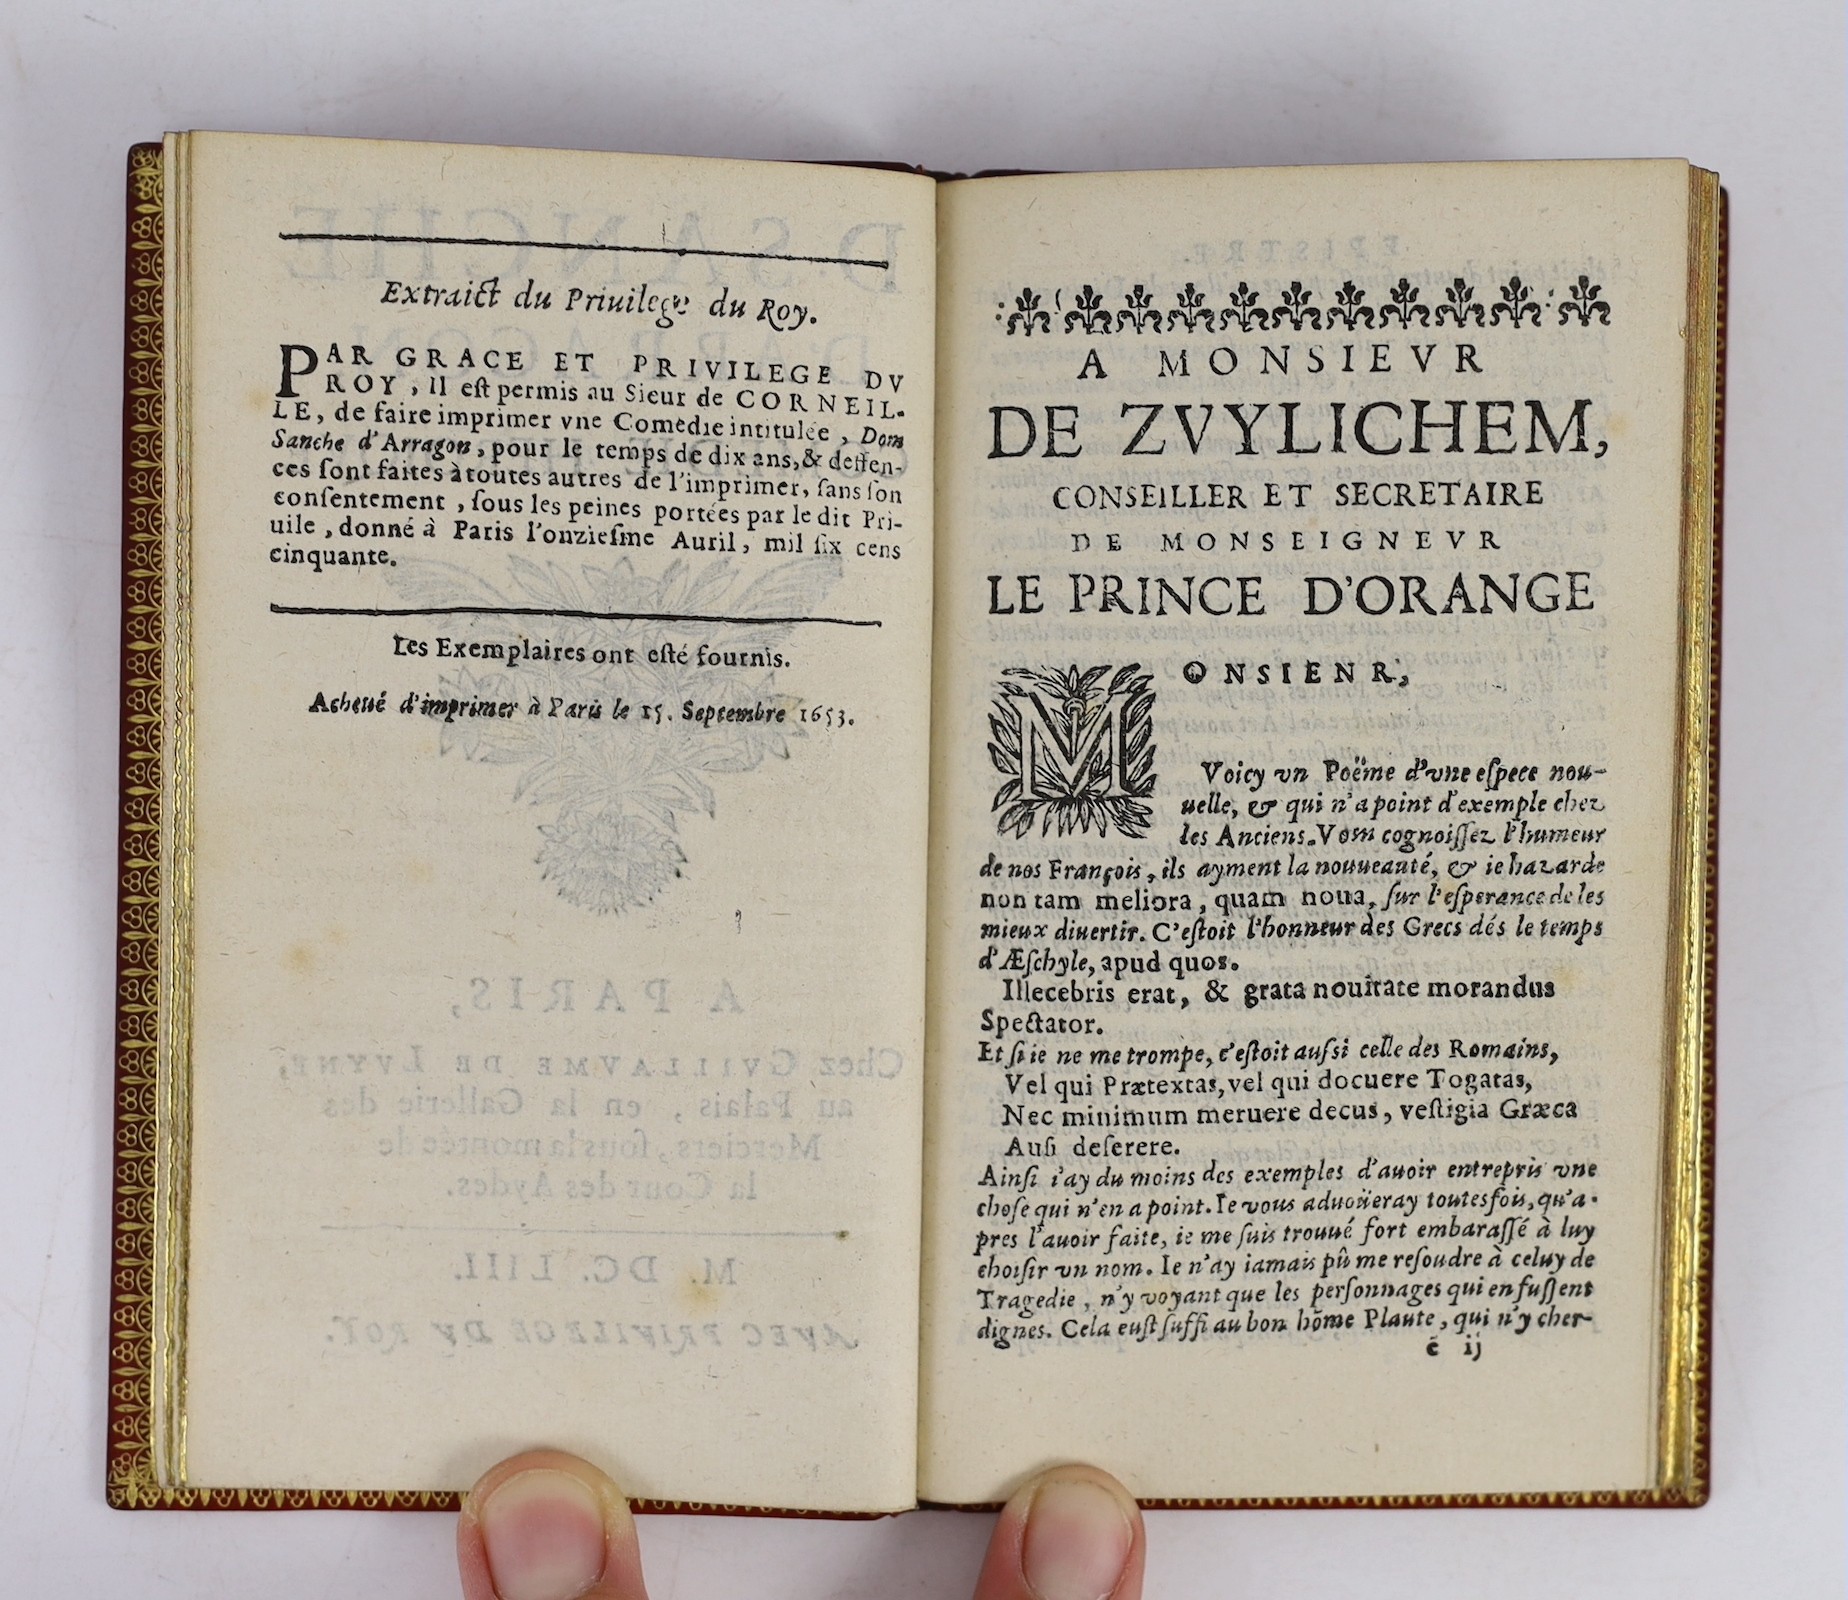 Cornielle, Pierre - Don Sanche d’Aragon, comedie heroique, 2nd edition, 12mo, later red morocco by Belz-Niedree, Guillaume de Luyne, Paris, 1653